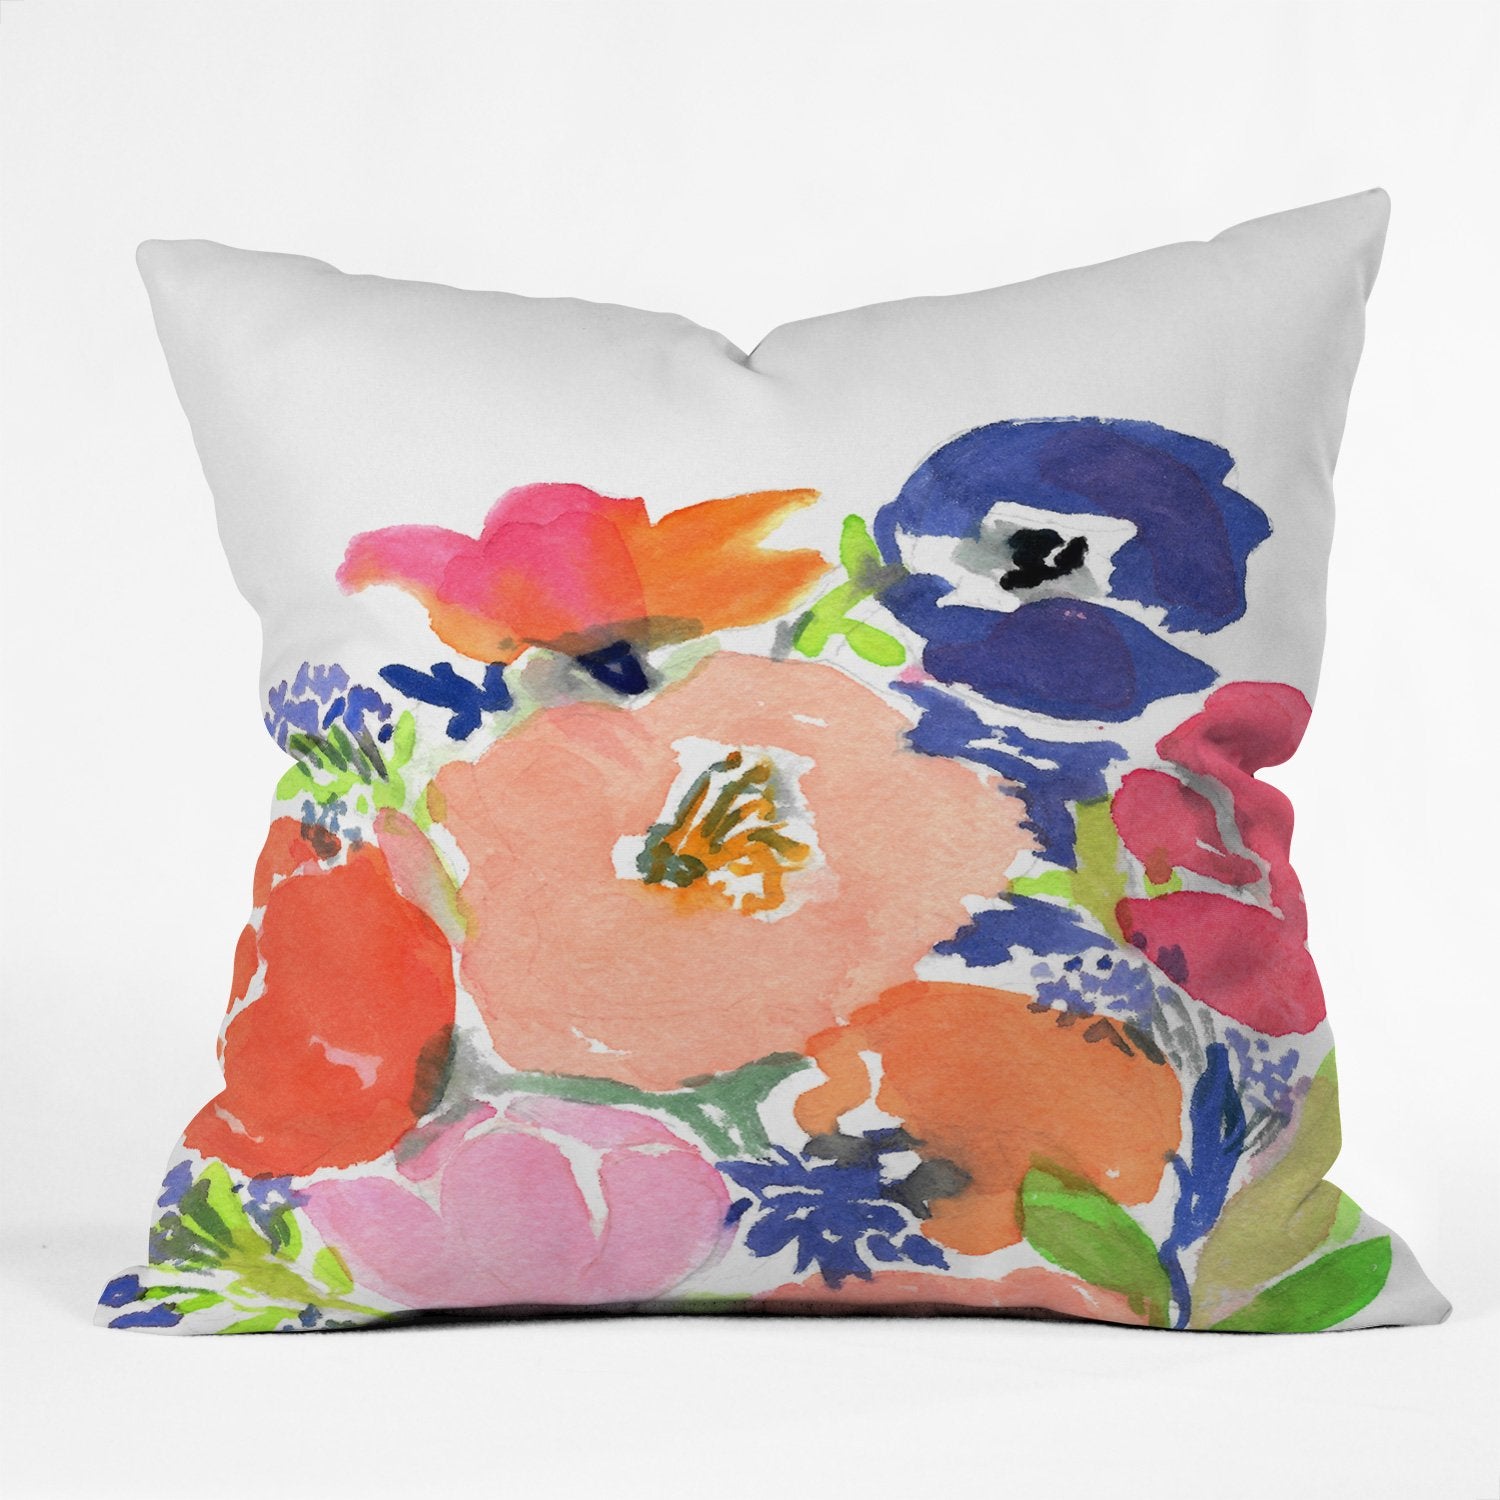 Floral Frenzy Outdoor Throw Pillow